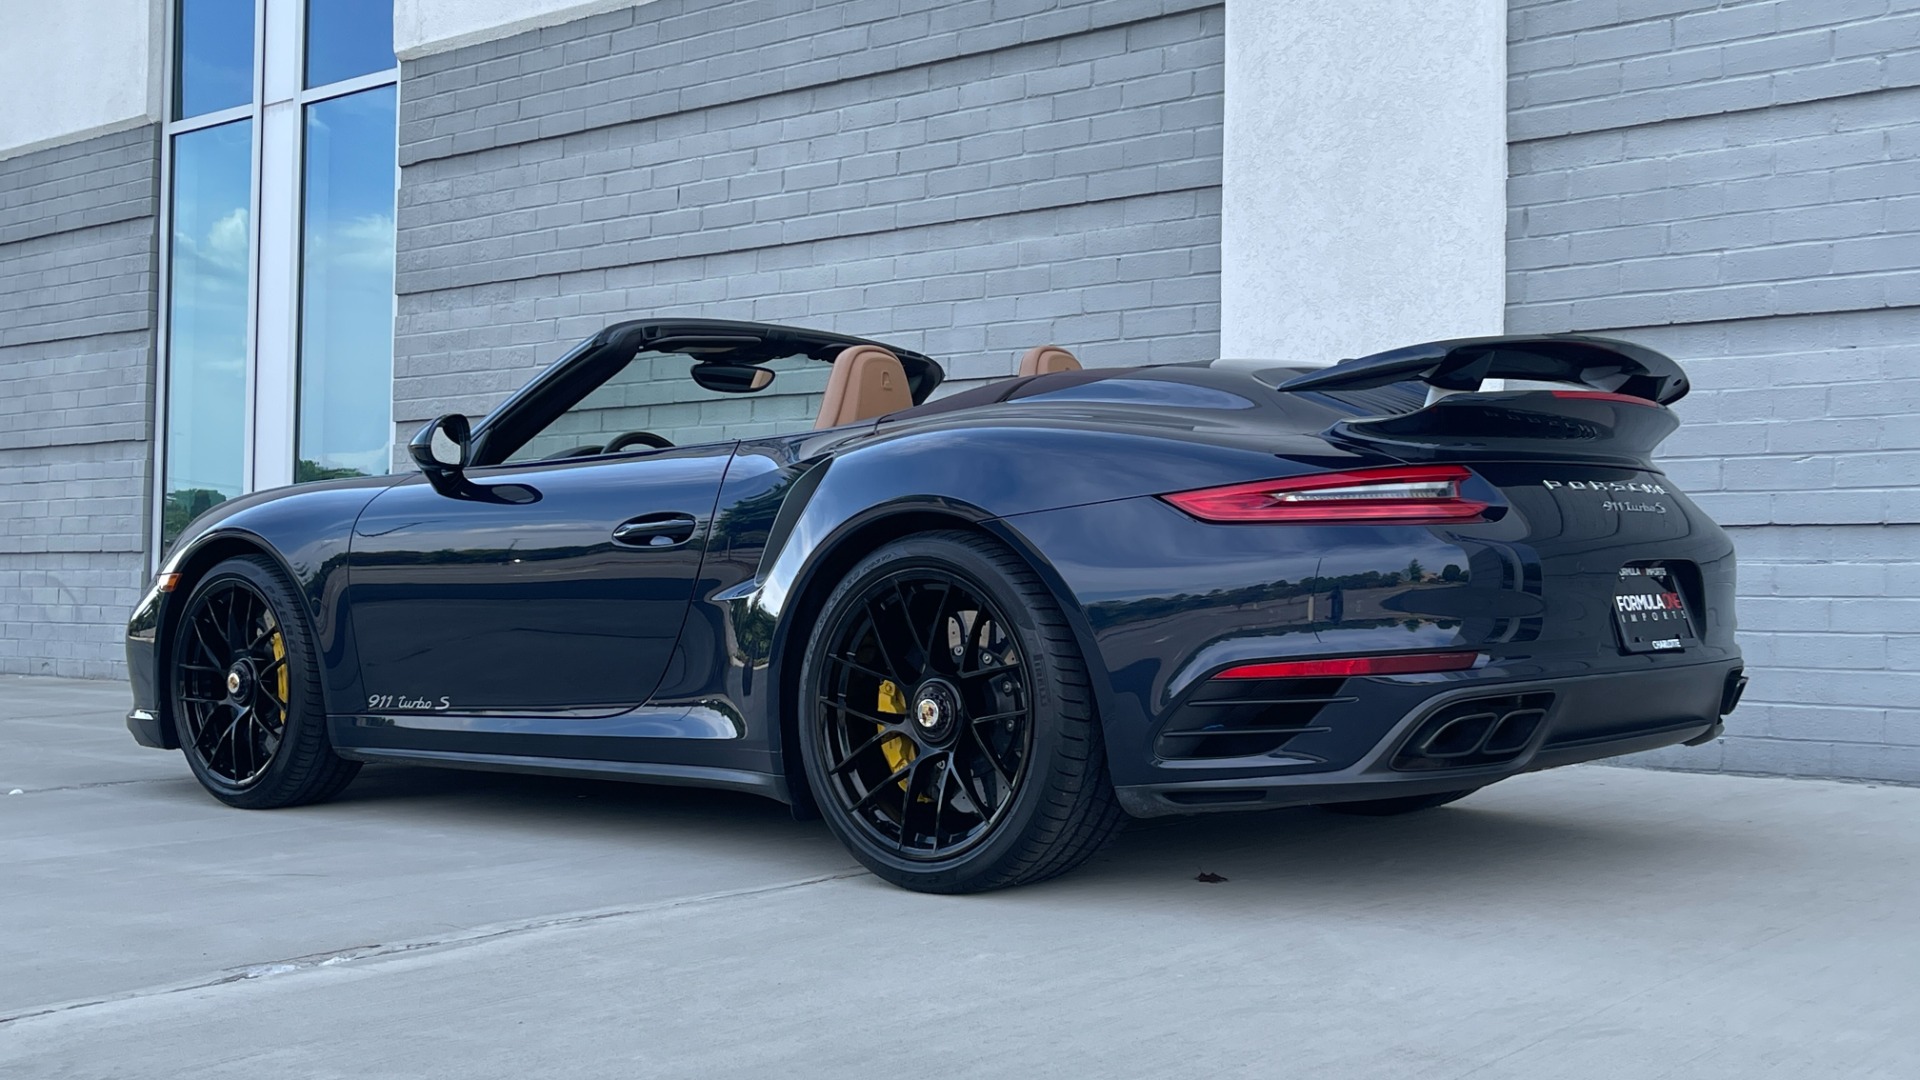 Used 2017 Porsche 911 Turbo S / CABRIOLET / FRONT LIFT / PDK / 20IN WHEELS for sale Sold at Formula Imports in Charlotte NC 28227 5